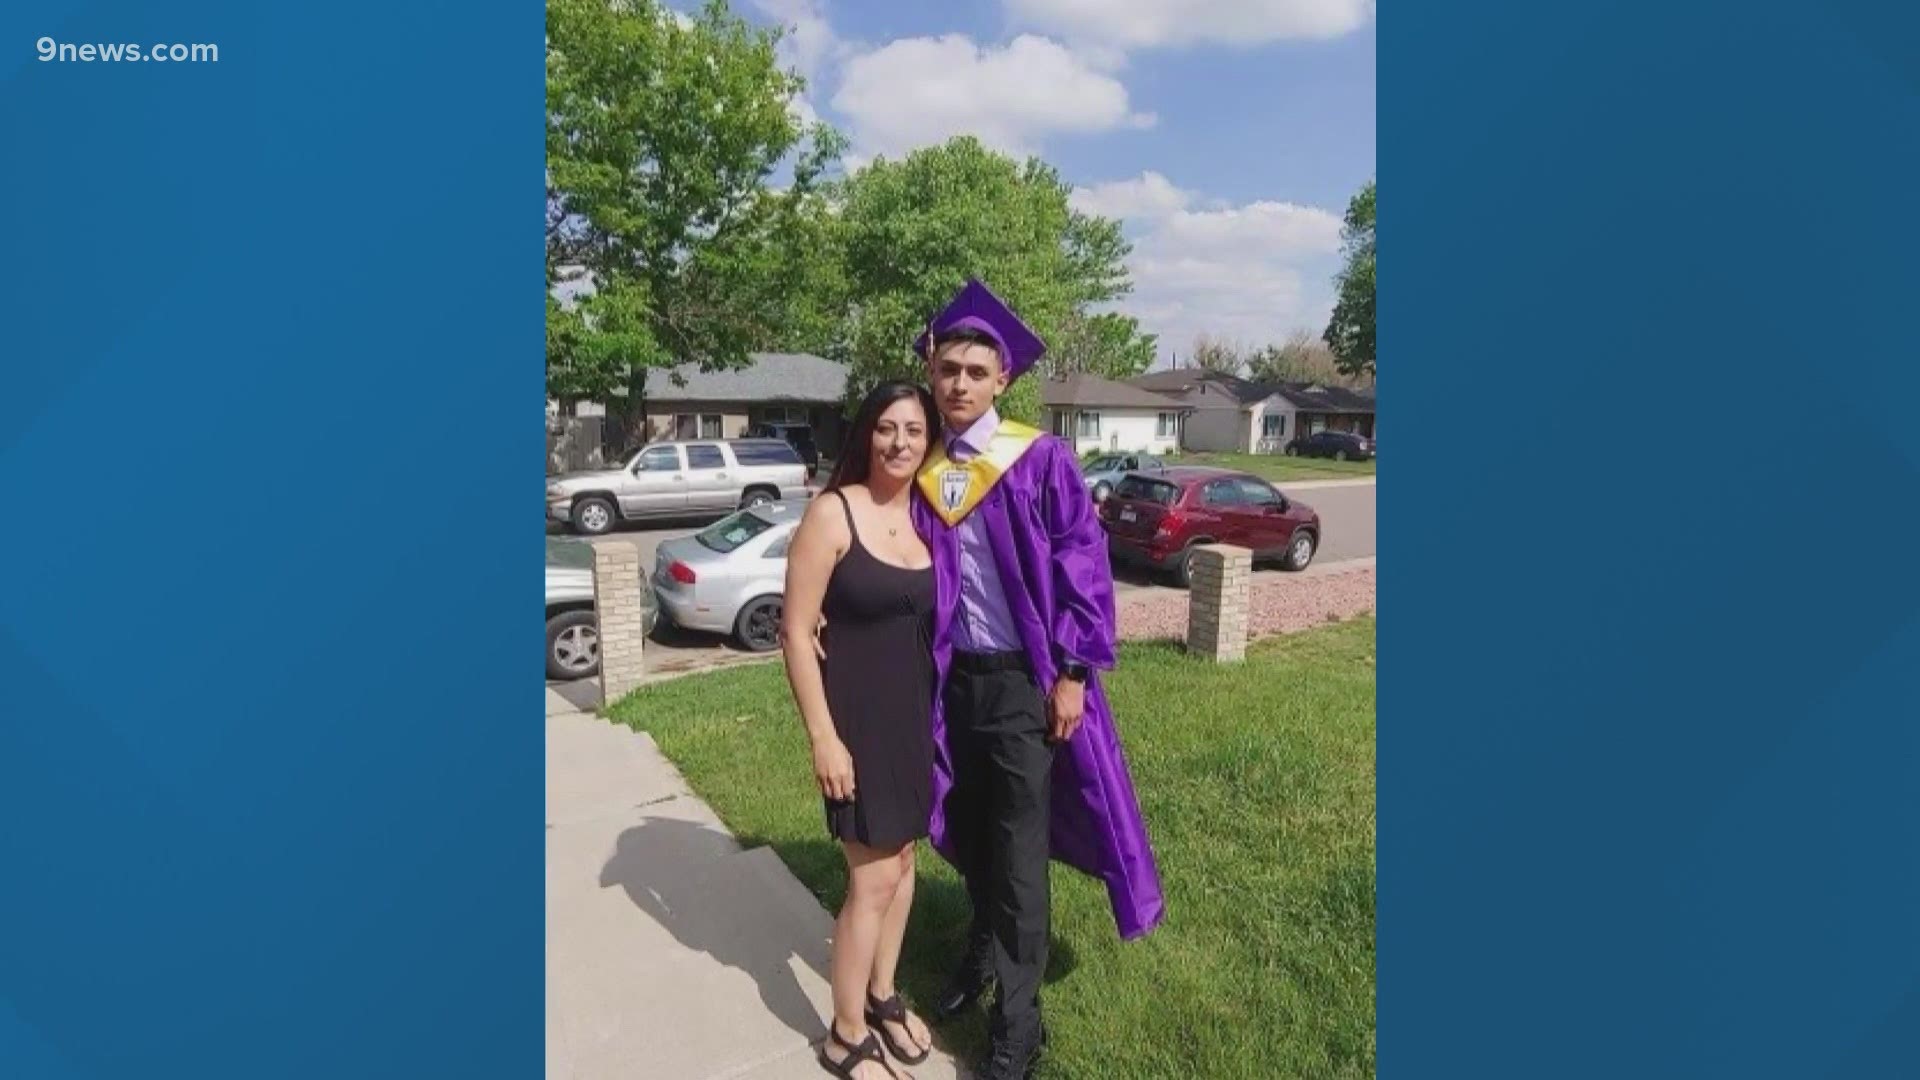 Victor Sandoval is a Denver Scholarship Foundation scholar who was inspired by his mom to earn a degree.